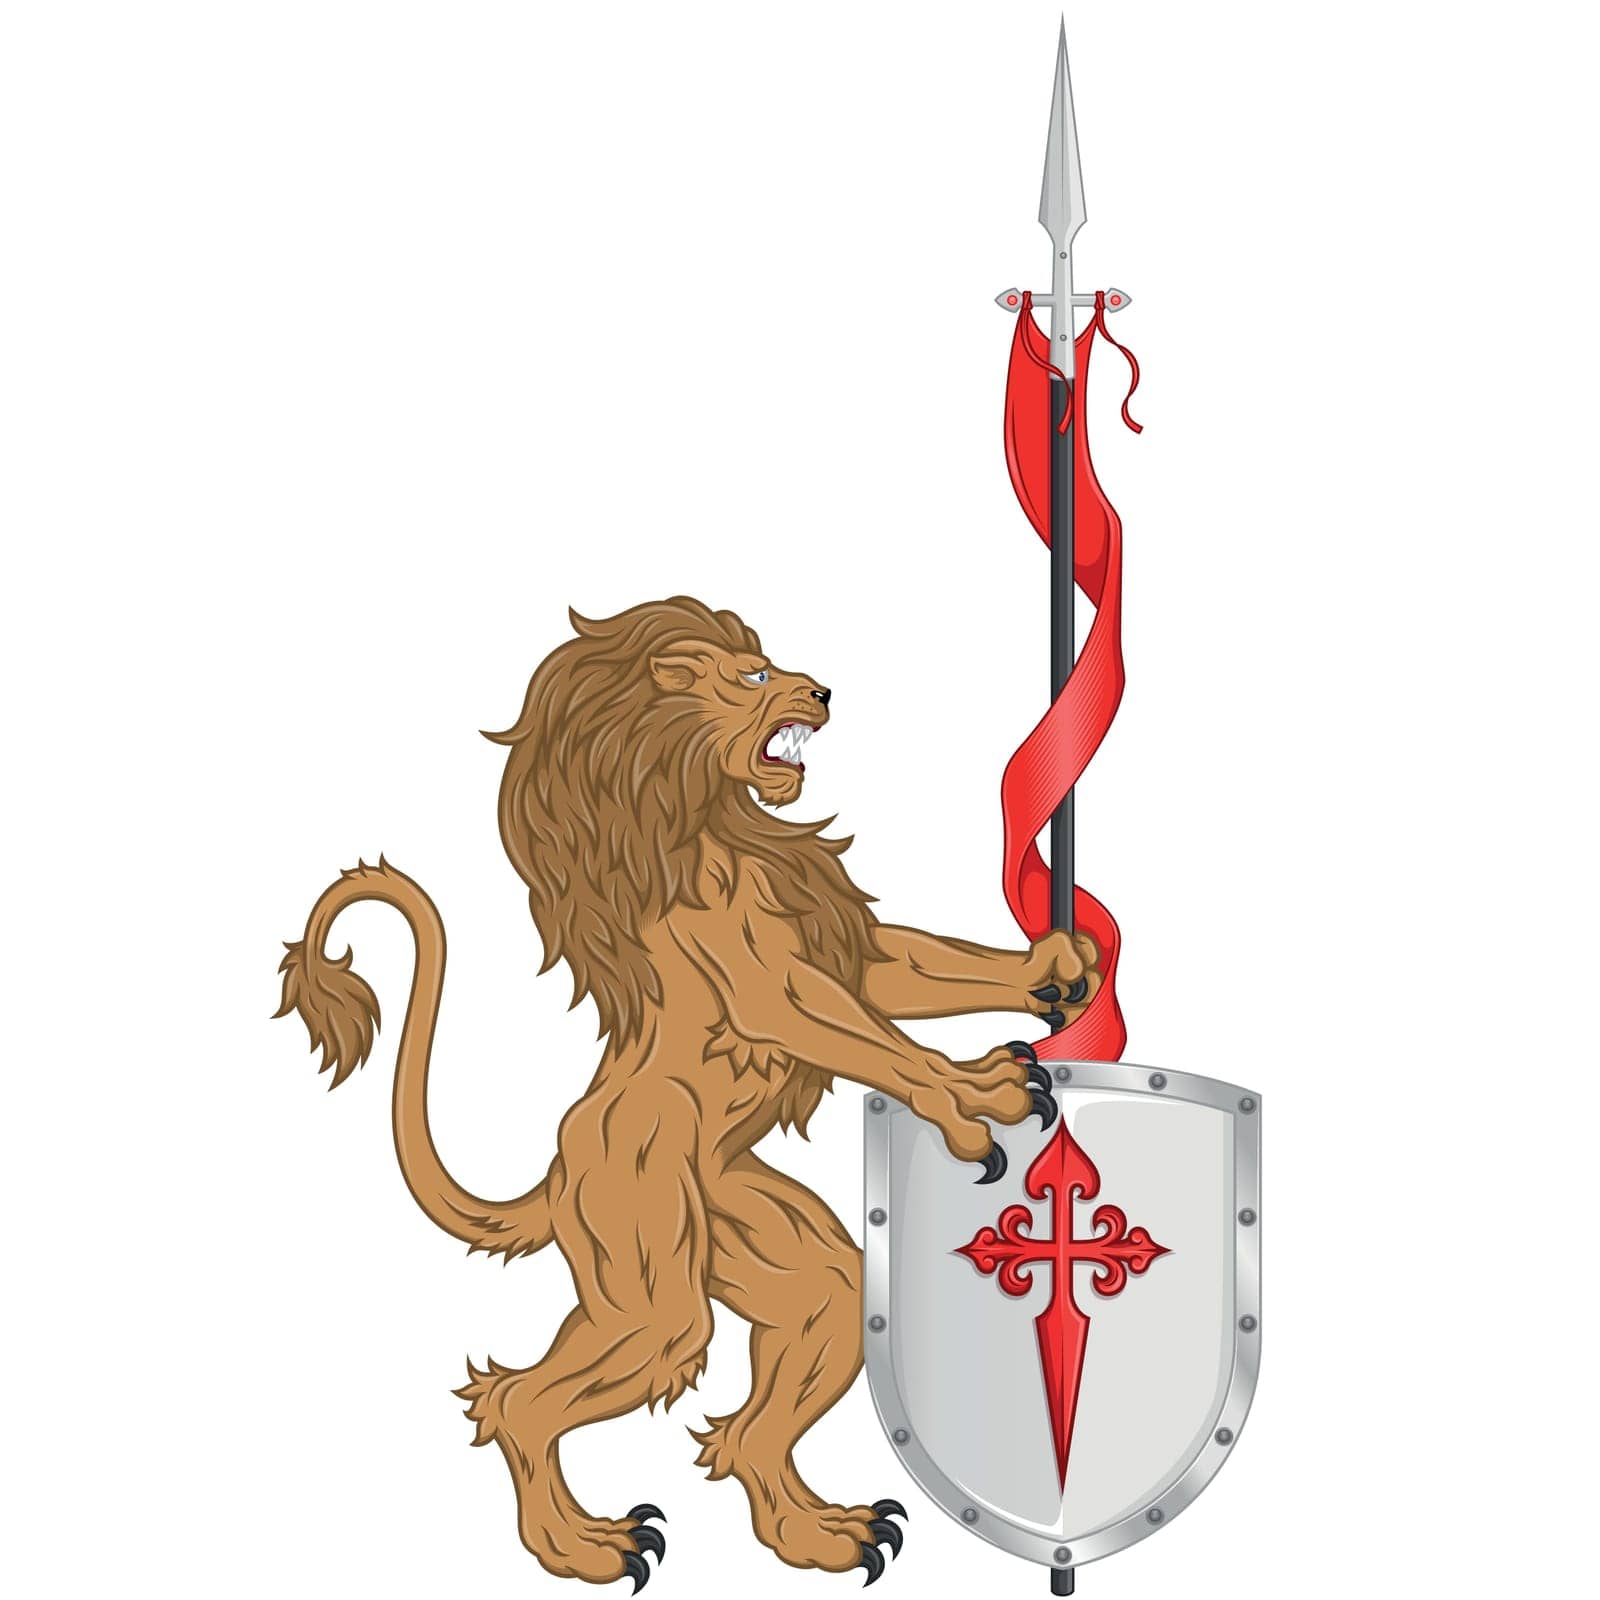 Vector design of rampant lion with medieval pennant and shield, Armed lion with spear and shield, heraldic symbol of European Middle Ages